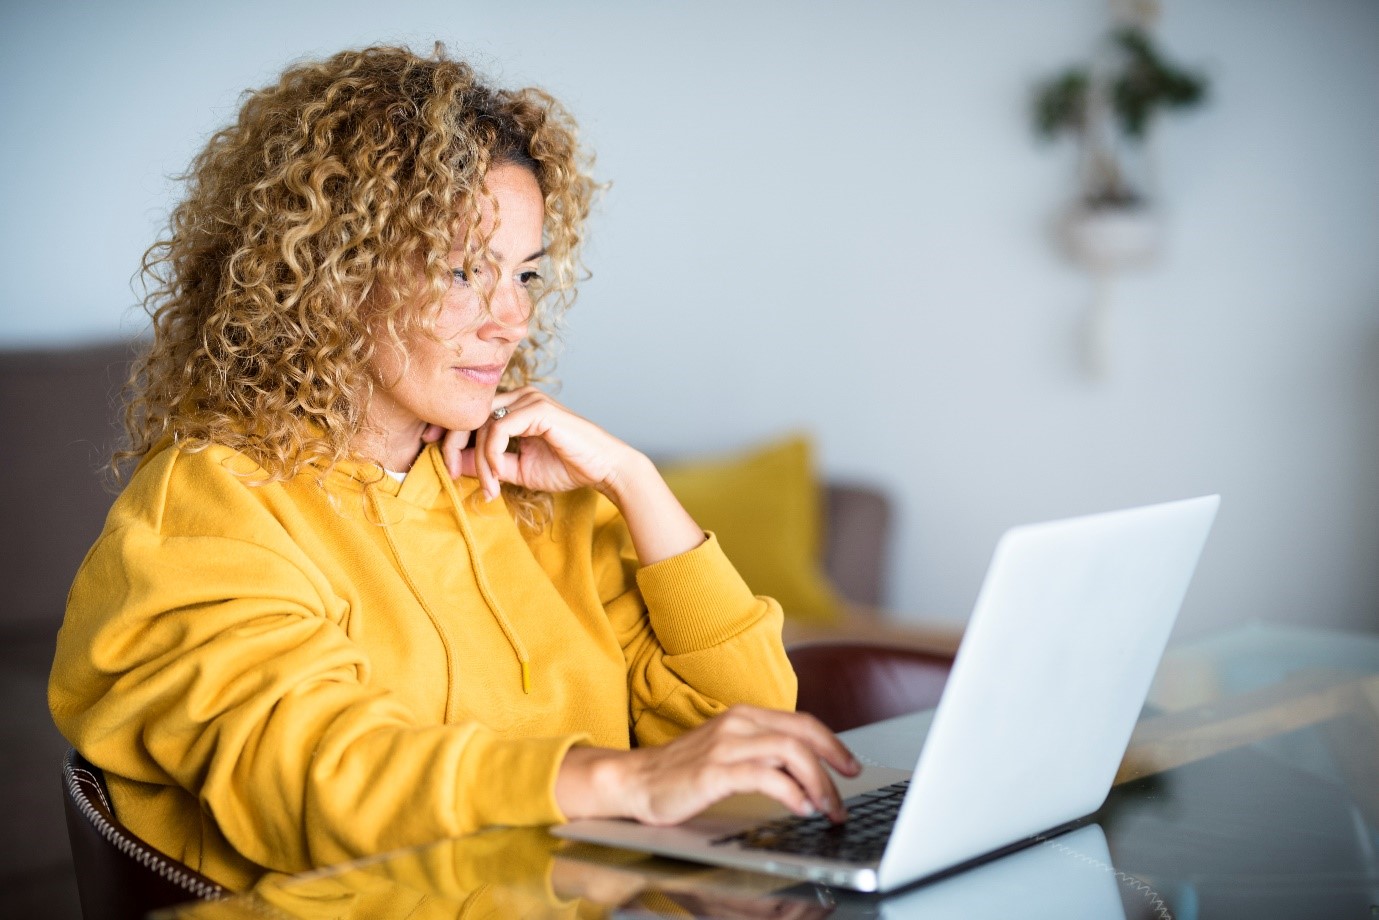 Female in yellow blouse on laptop